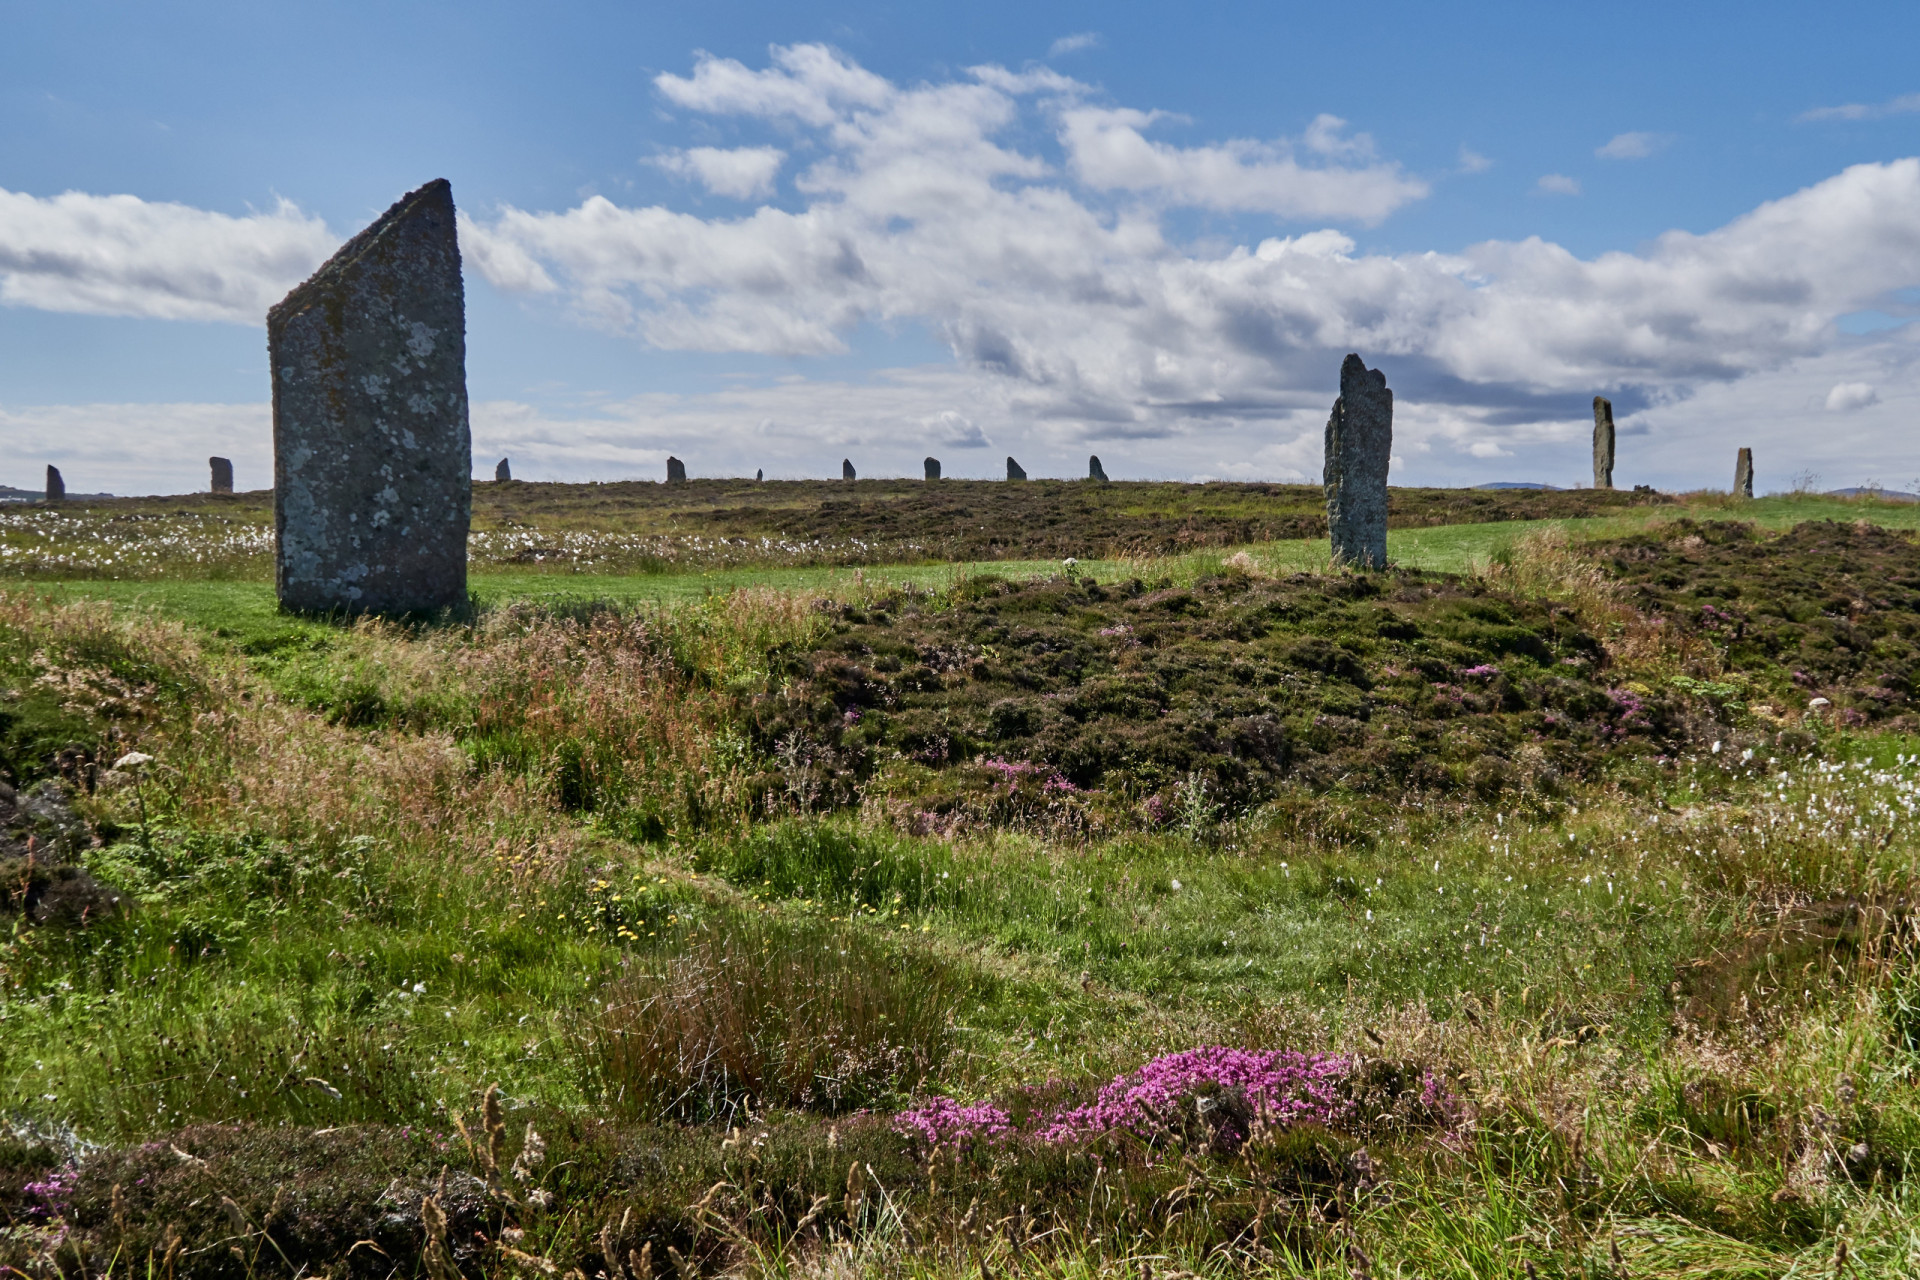 <p>On the enchanting coastline of the Scottish island of Orkney exists a route that's 58 miles (93 km) long, honoring the island’s patron saint.</p><p>You may also like:<a href="https://www.starsinsider.com/n/458629?utm_source=msn.com&utm_medium=display&utm_campaign=referral_description&utm_content=524487en-us"> Actors you didn't realize were also child actors</a></p>